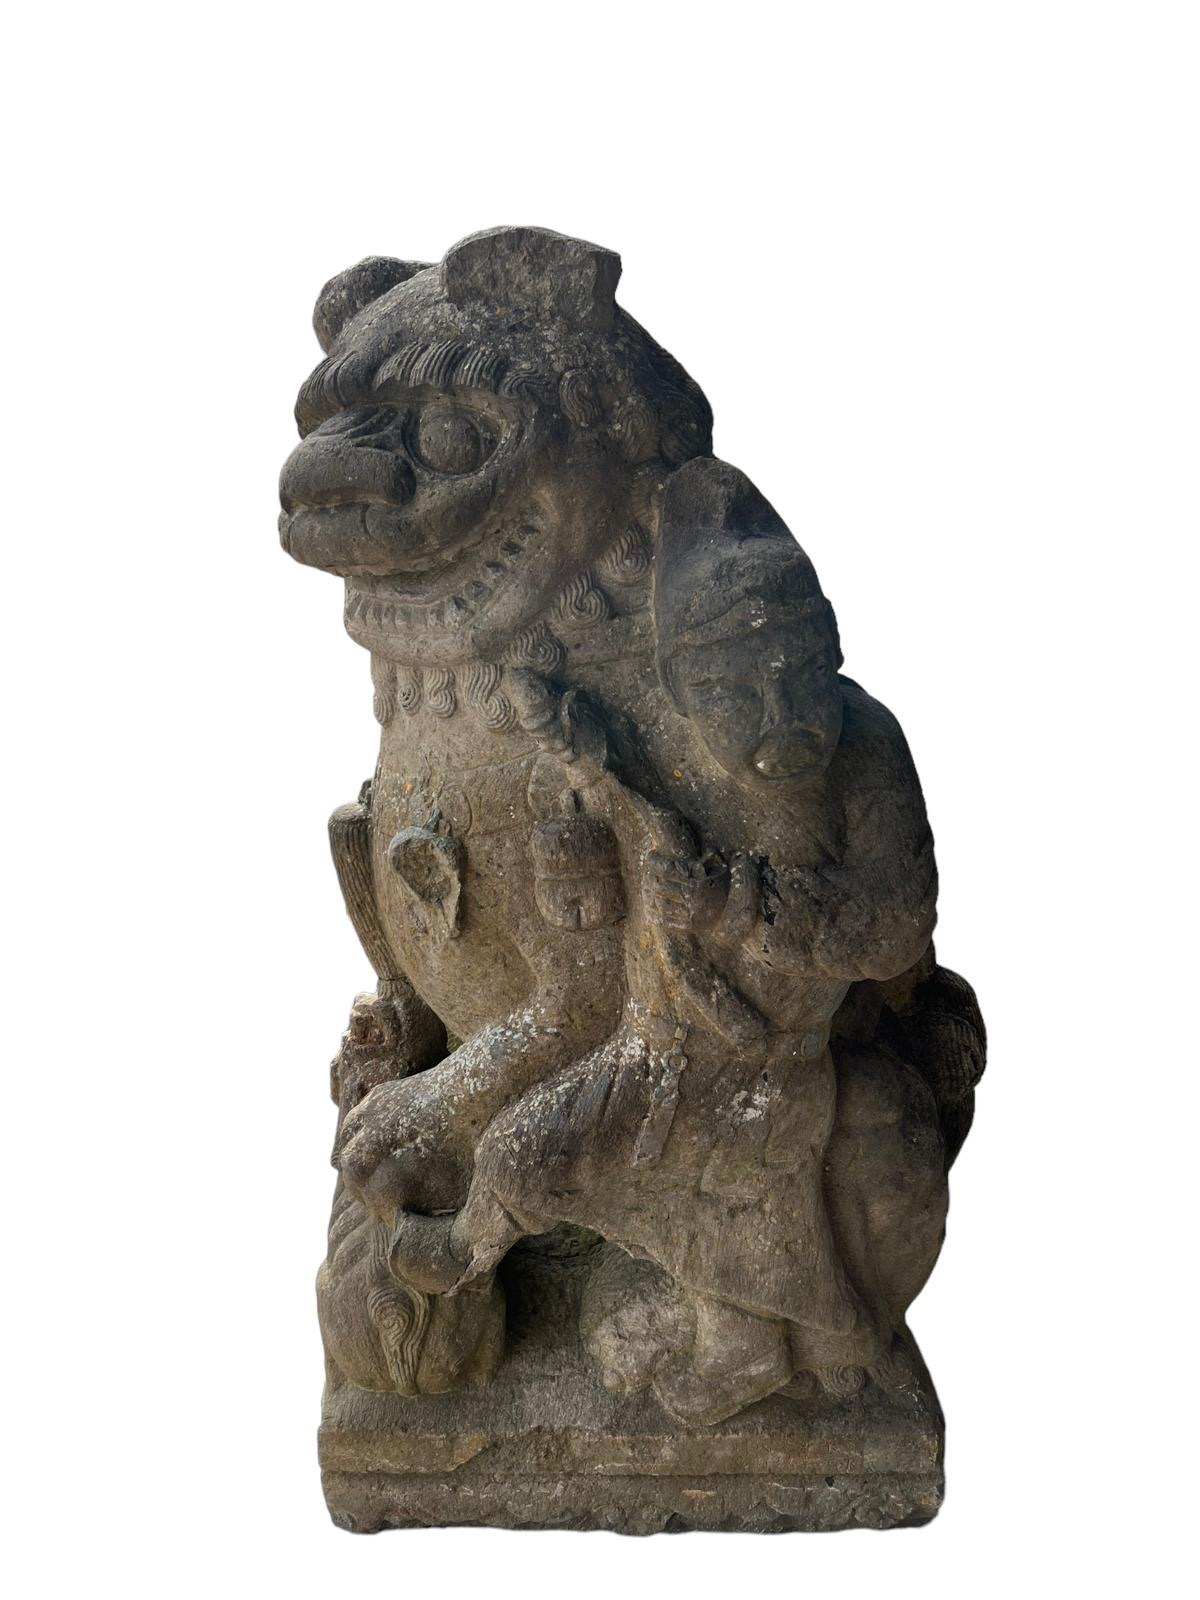 A LARGE RARE PAIR OF CHINESE 15TH CENTURY CARVED STONE MING DYNASTY YONGLE PERIOD BUDDHIST LIONS - Image 4 of 20